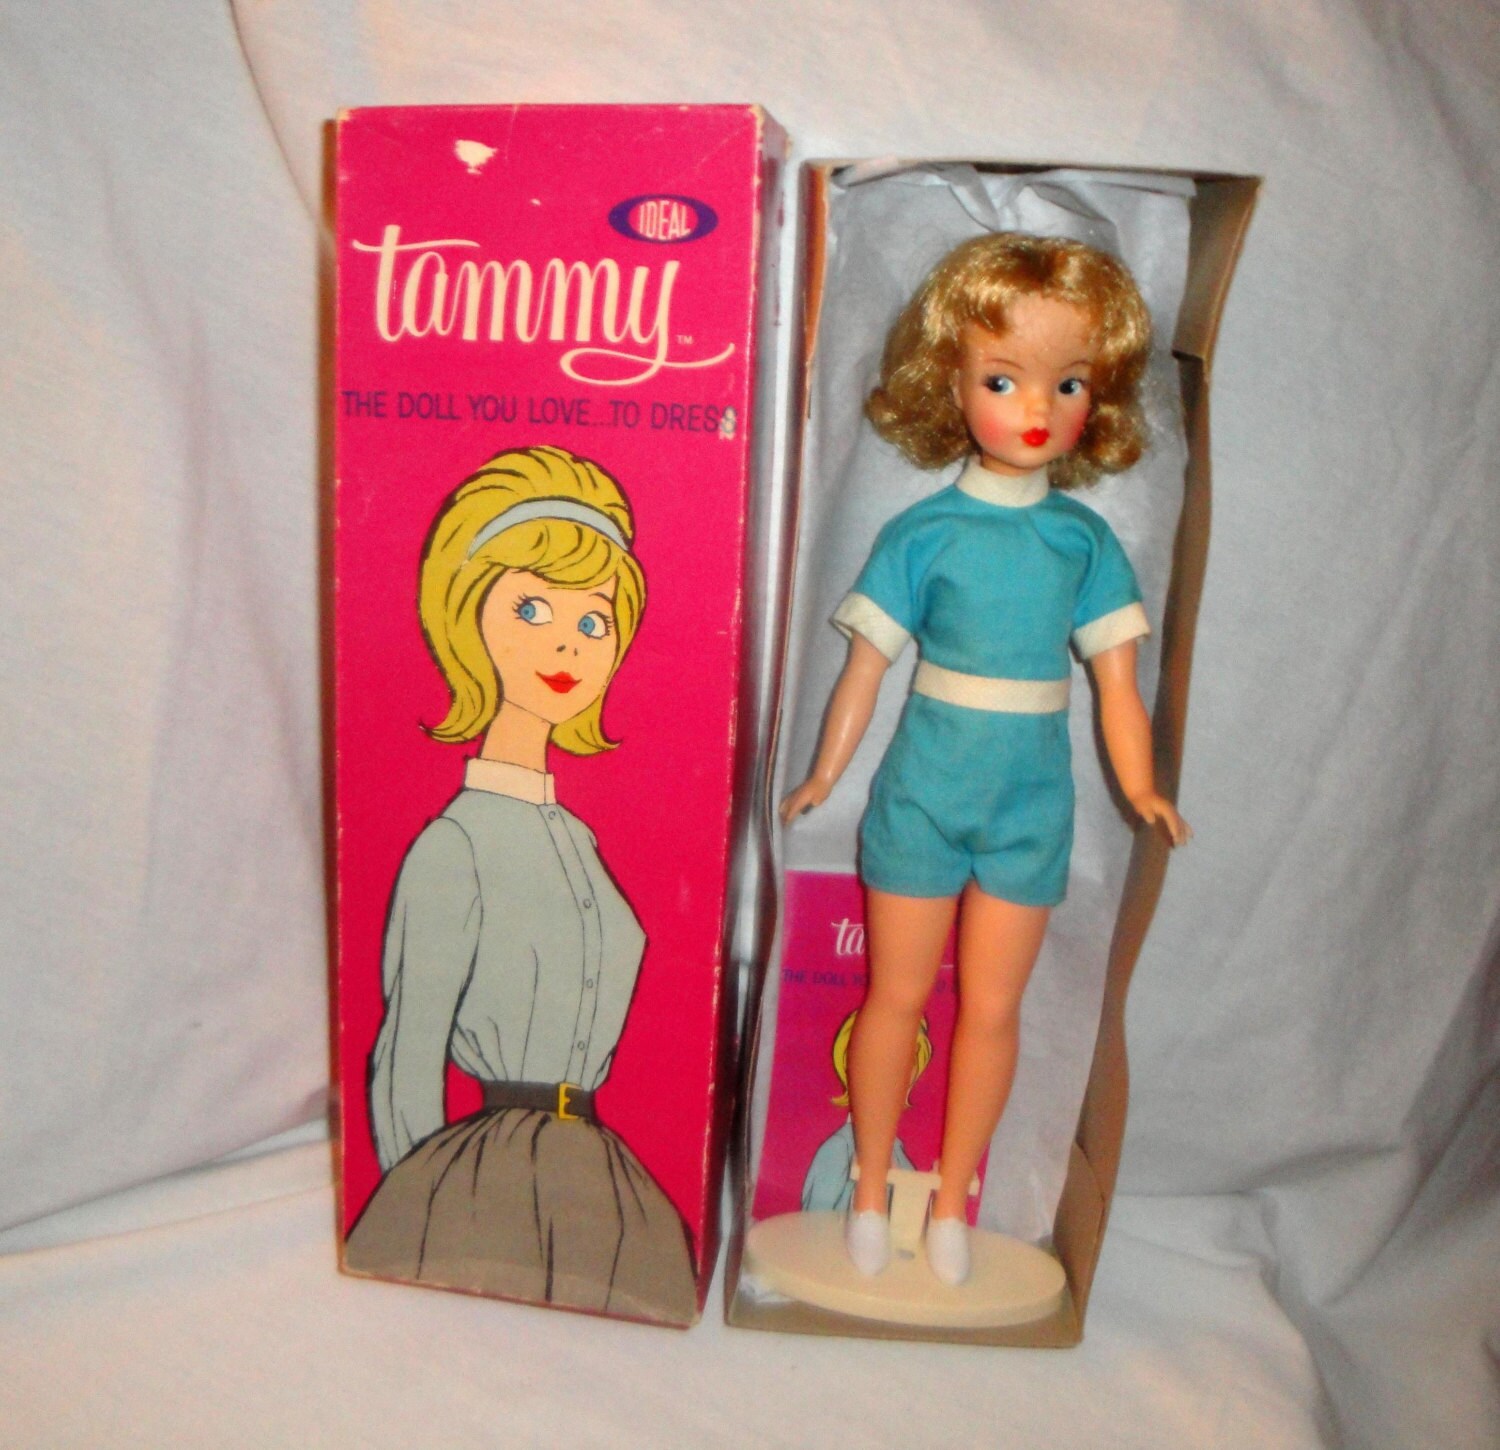 1962 Ideal Tammy Doll with Original Box Stand and Booklet